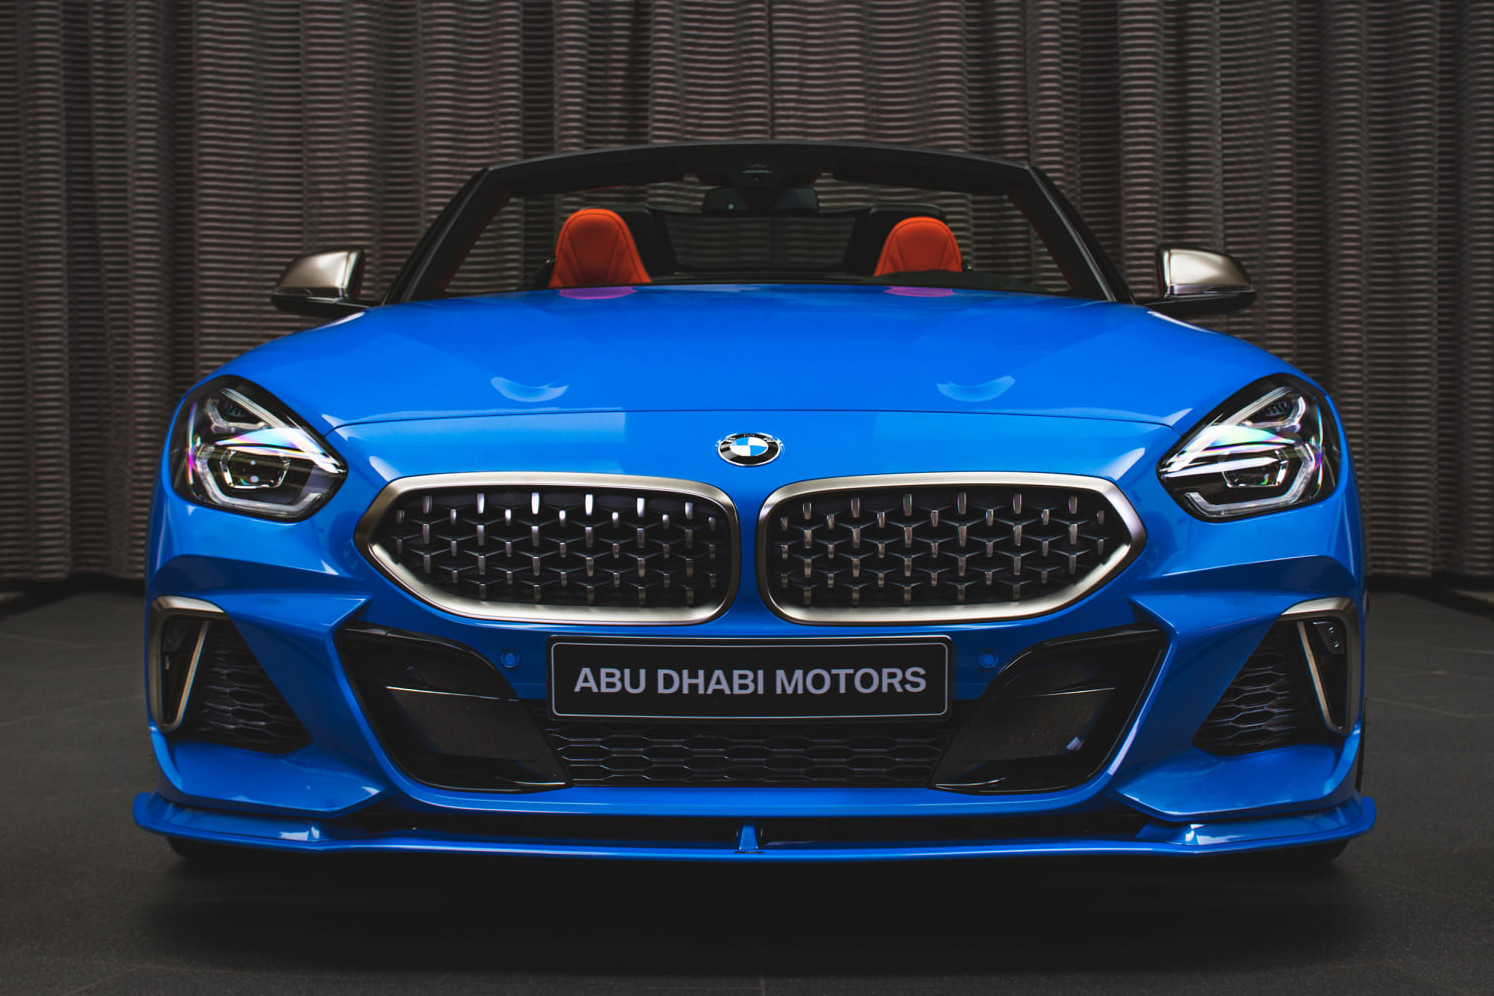 Accord Good feeling take down AC Schnitzer-tuned BMW Z4 M40i displayed in Misano blue